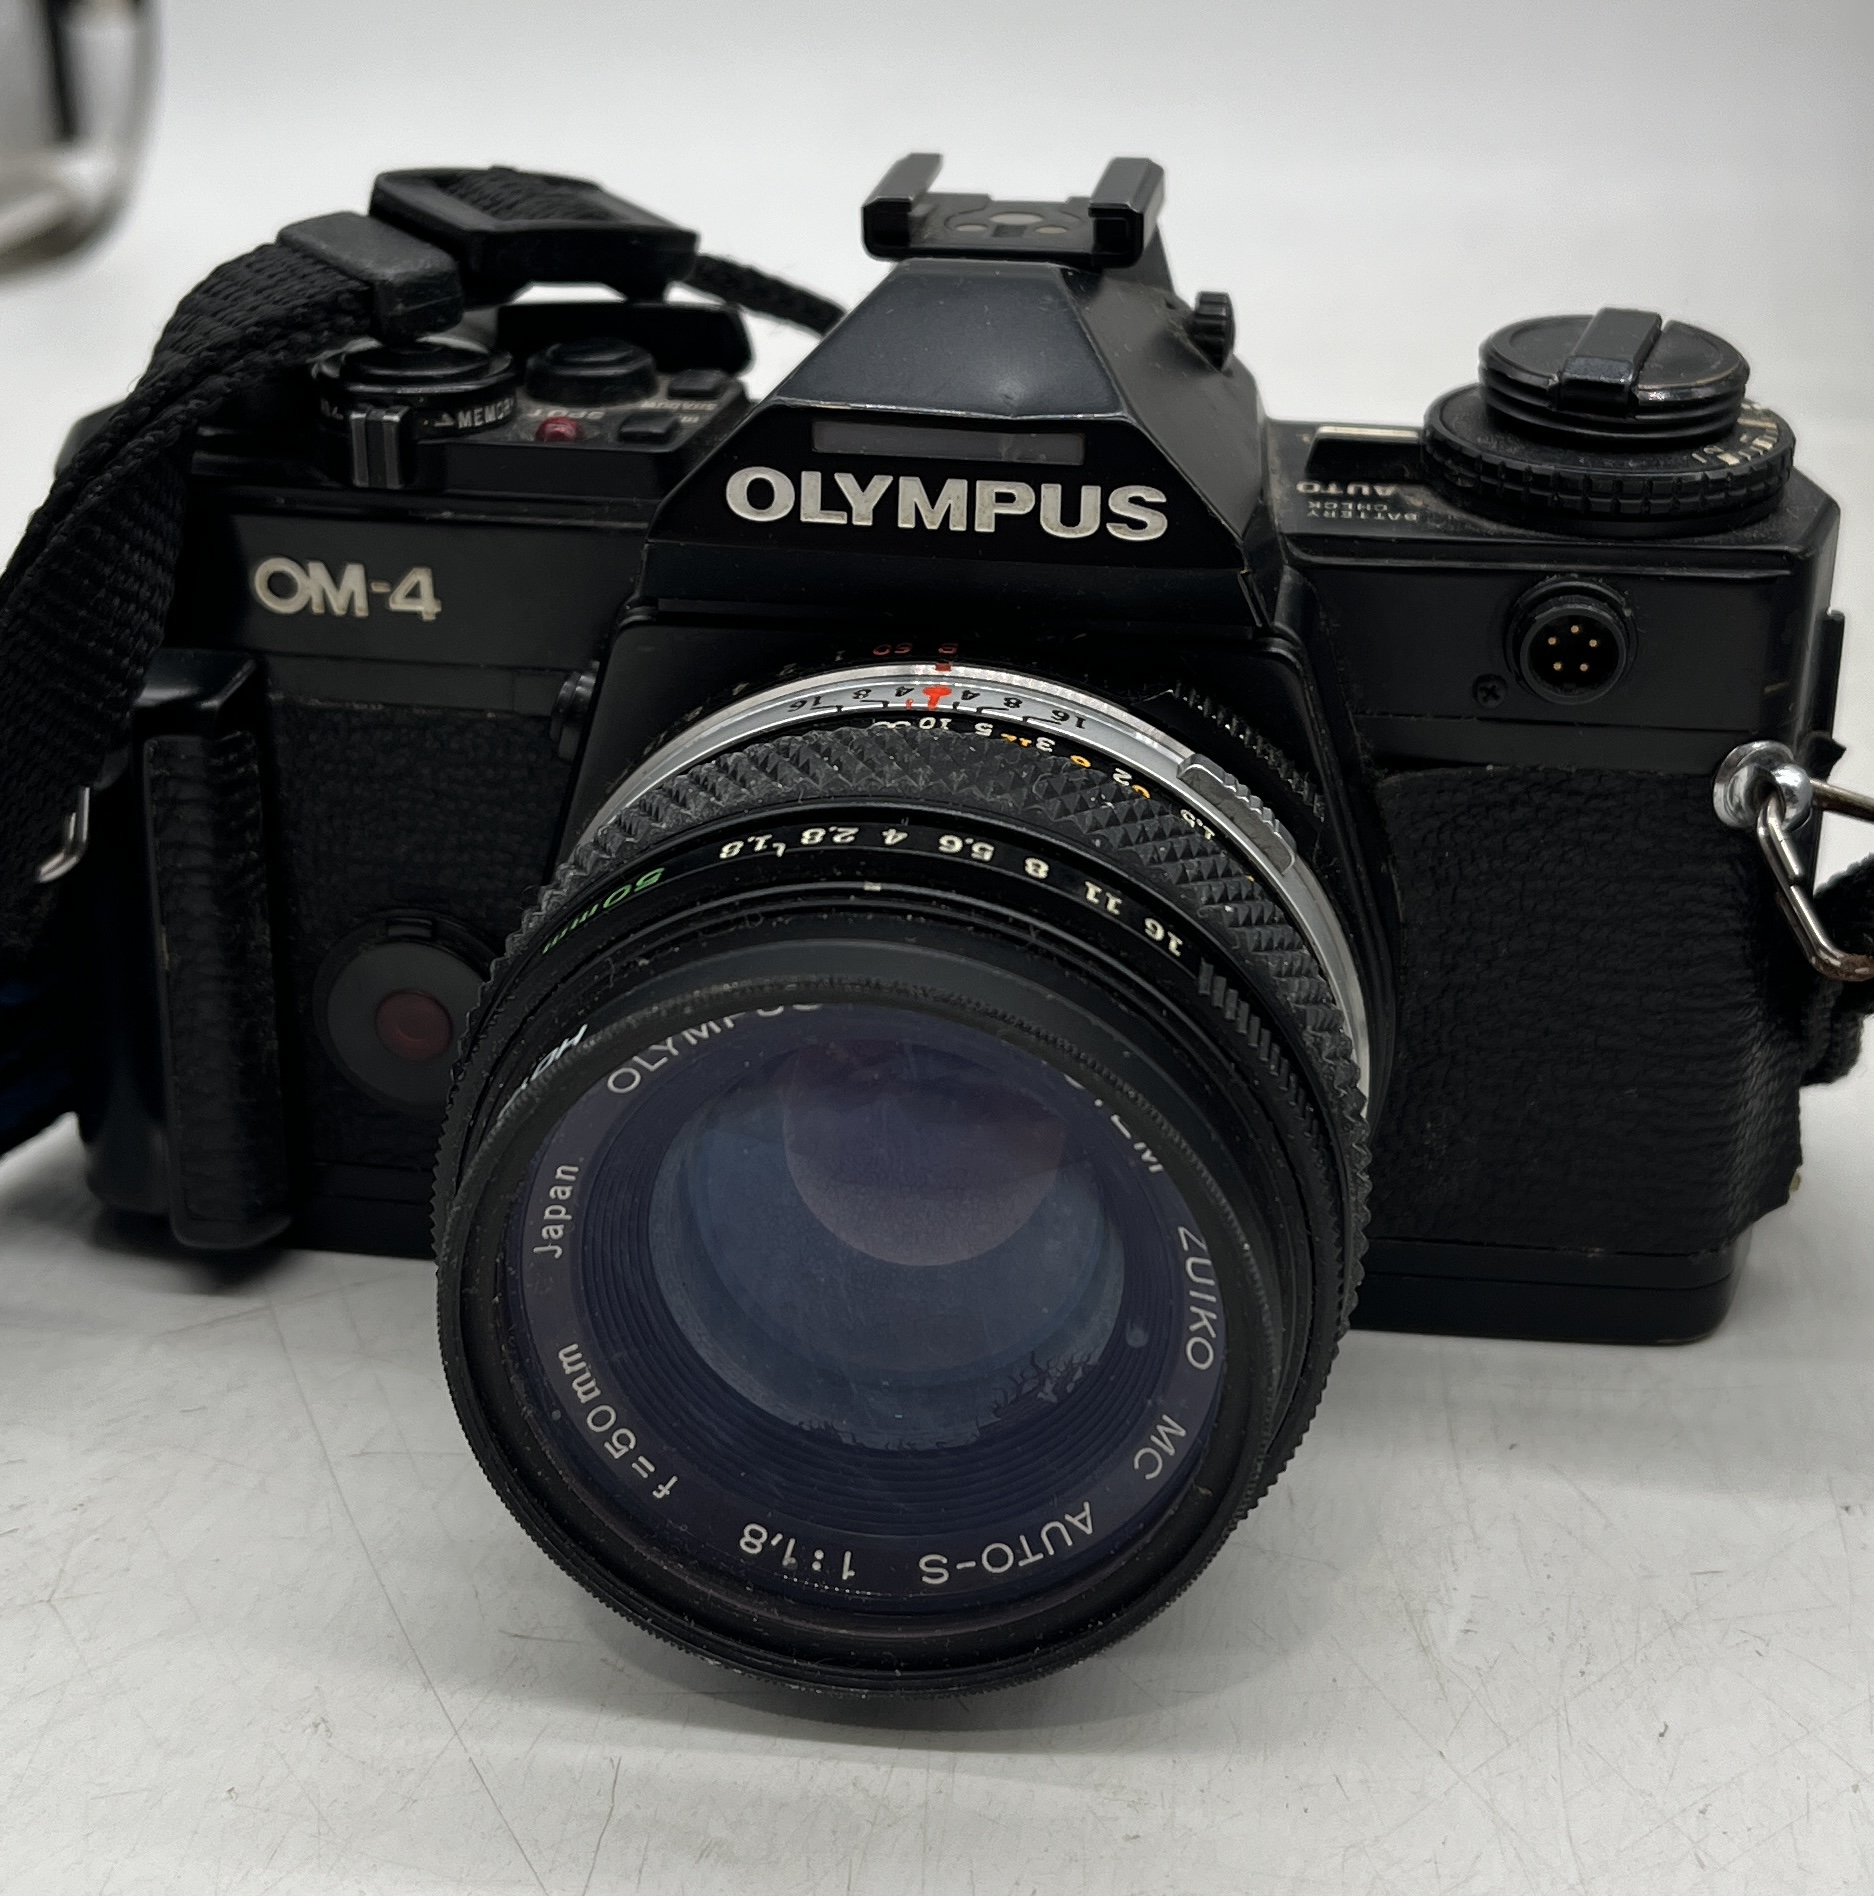 A cased collection of cameras, lenses and accessories including Olympus OM-2, Olympus OM-4 etc. - Image 2 of 7